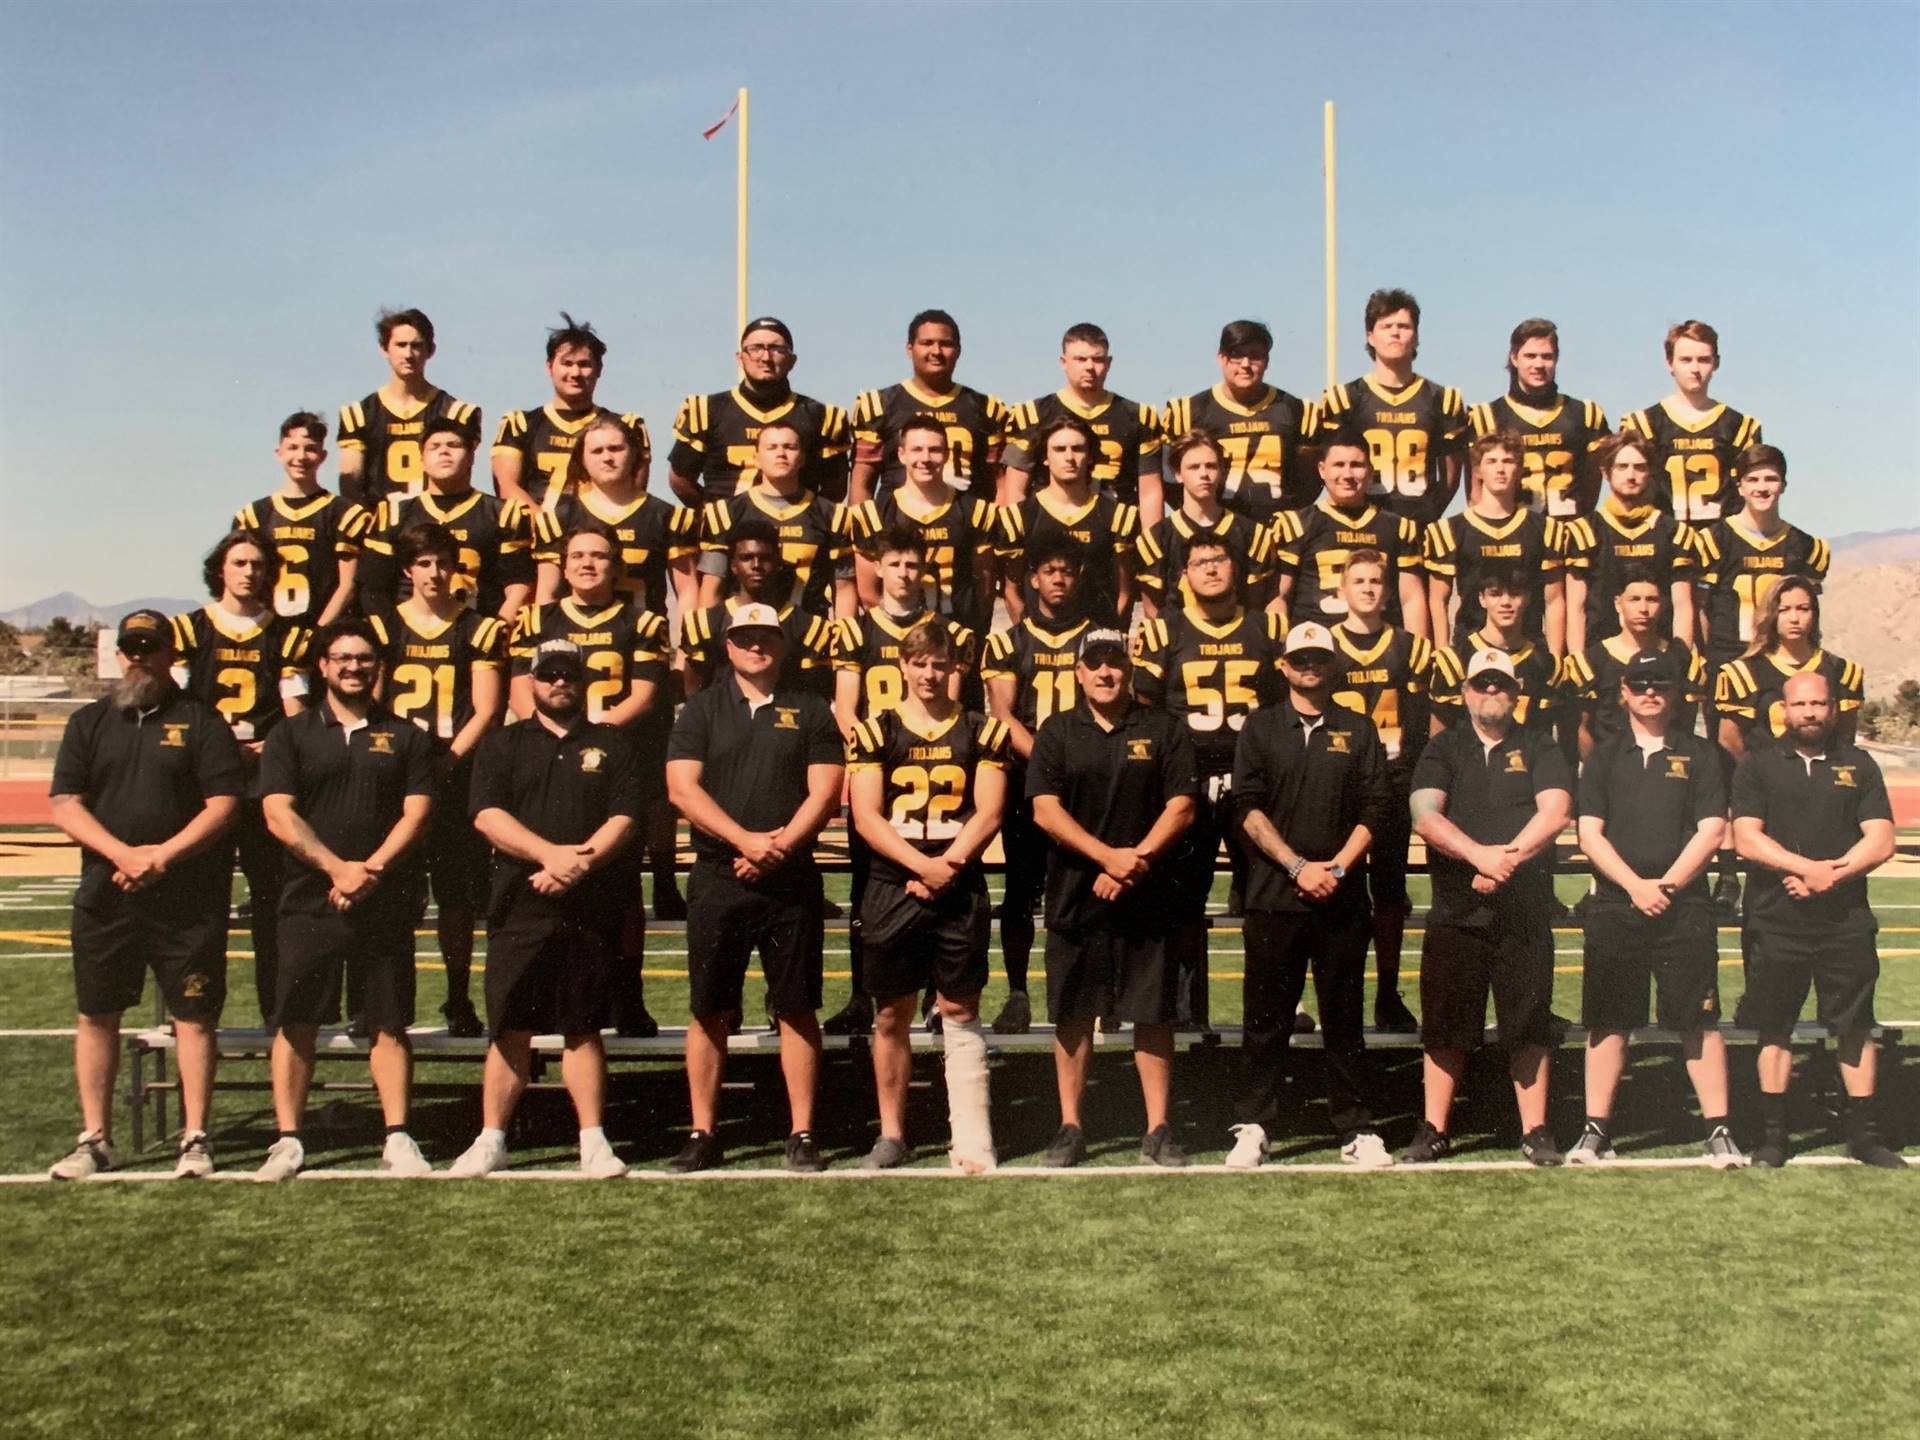 Football players posing for a team photo